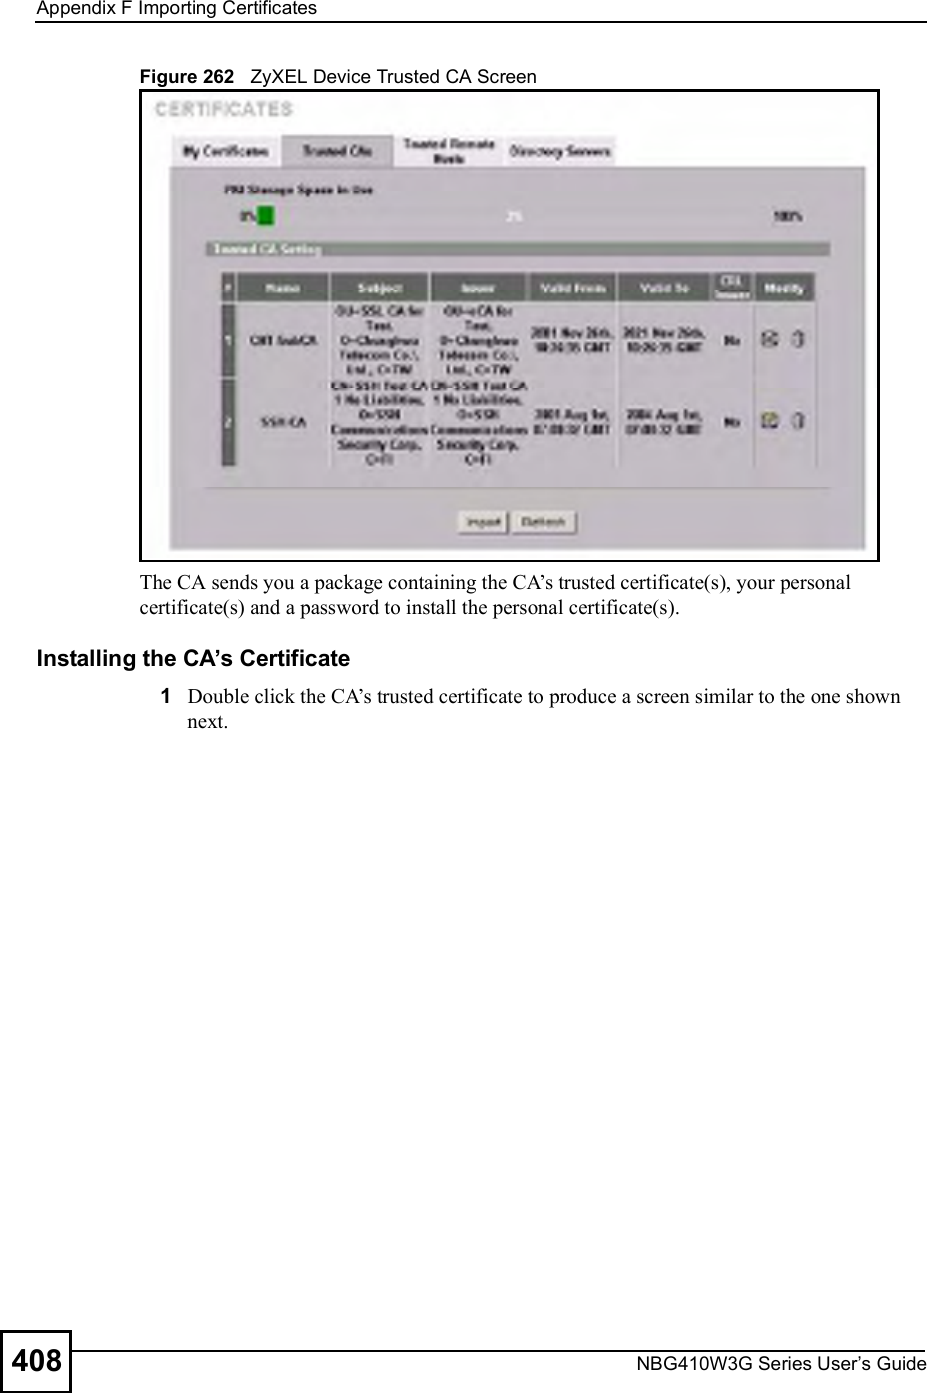 Appendix FImporting CertificatesNBG410W3G Series User s Guide408Figure 262   ZyXEL Device Trusted CA ScreenThe CA sends you a package containing the CA!s trusted certificate(s), your personal certificate(s) and a password to install the personal certificate(s).Installing the CA s Certificate1Double click the CA!s trusted certificate to produce a screen similar to the one shown next.